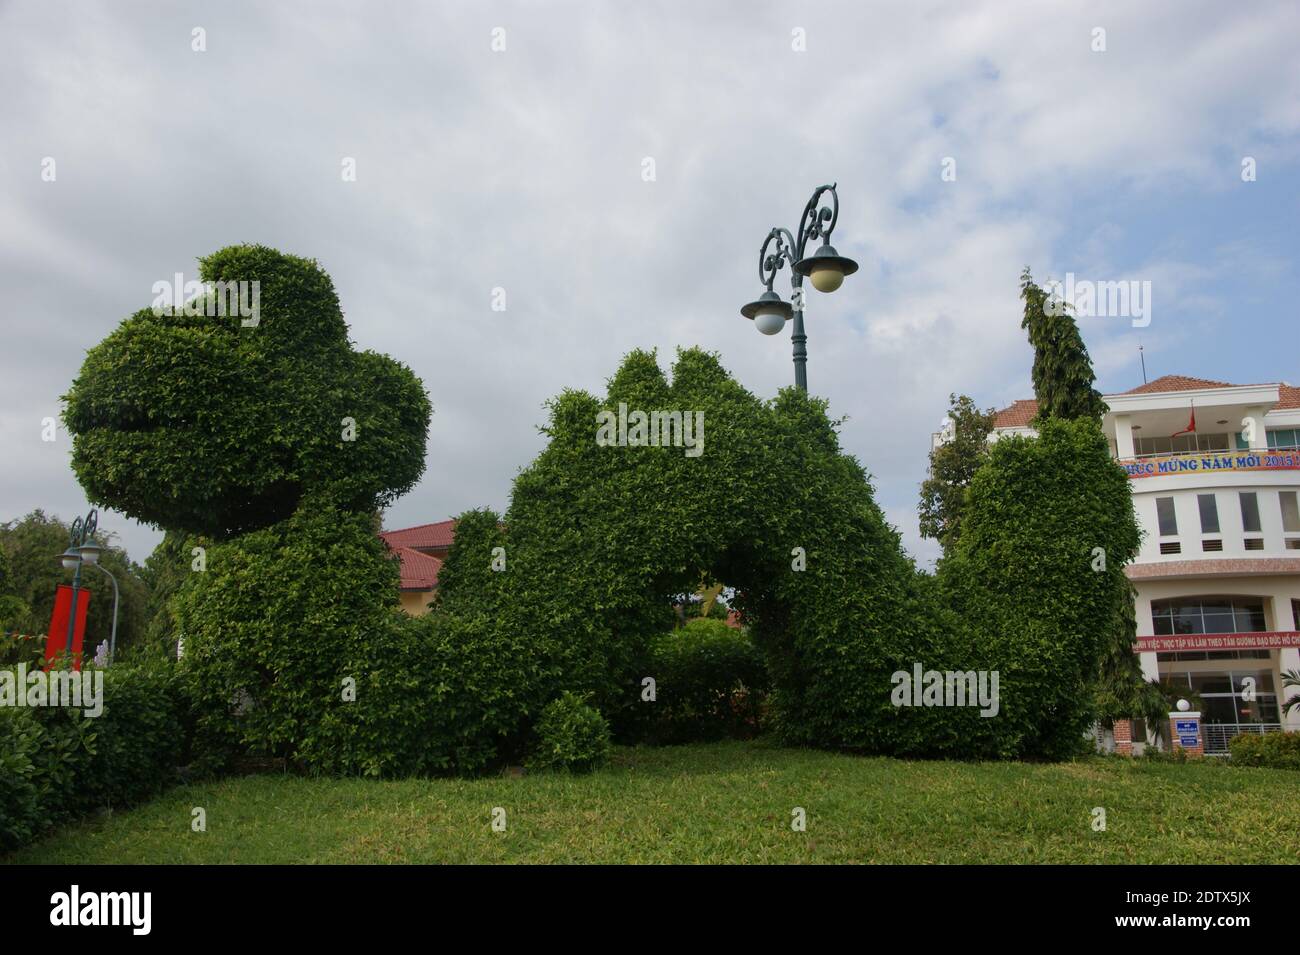 Green dragon clipped in a large arborisculpture in a Vietnamese park, Stock Photo